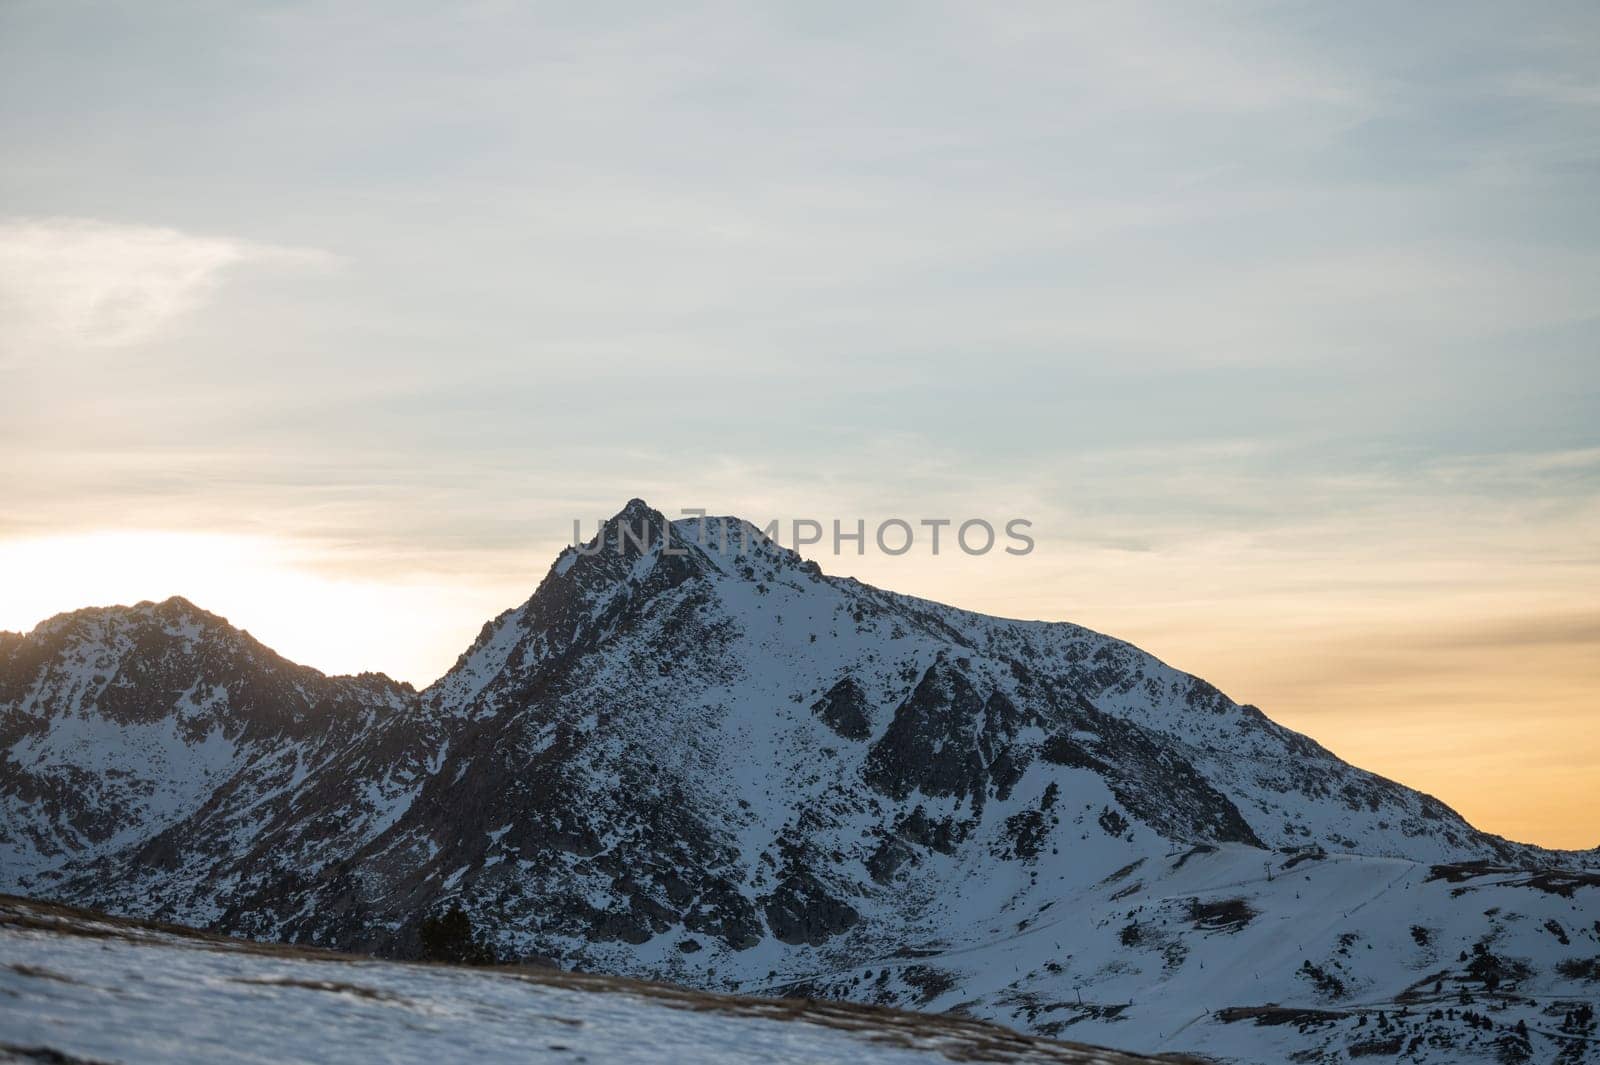 Mountains in the Pyrenees from the Grandvalira ski resort in Andorra by martinscphoto